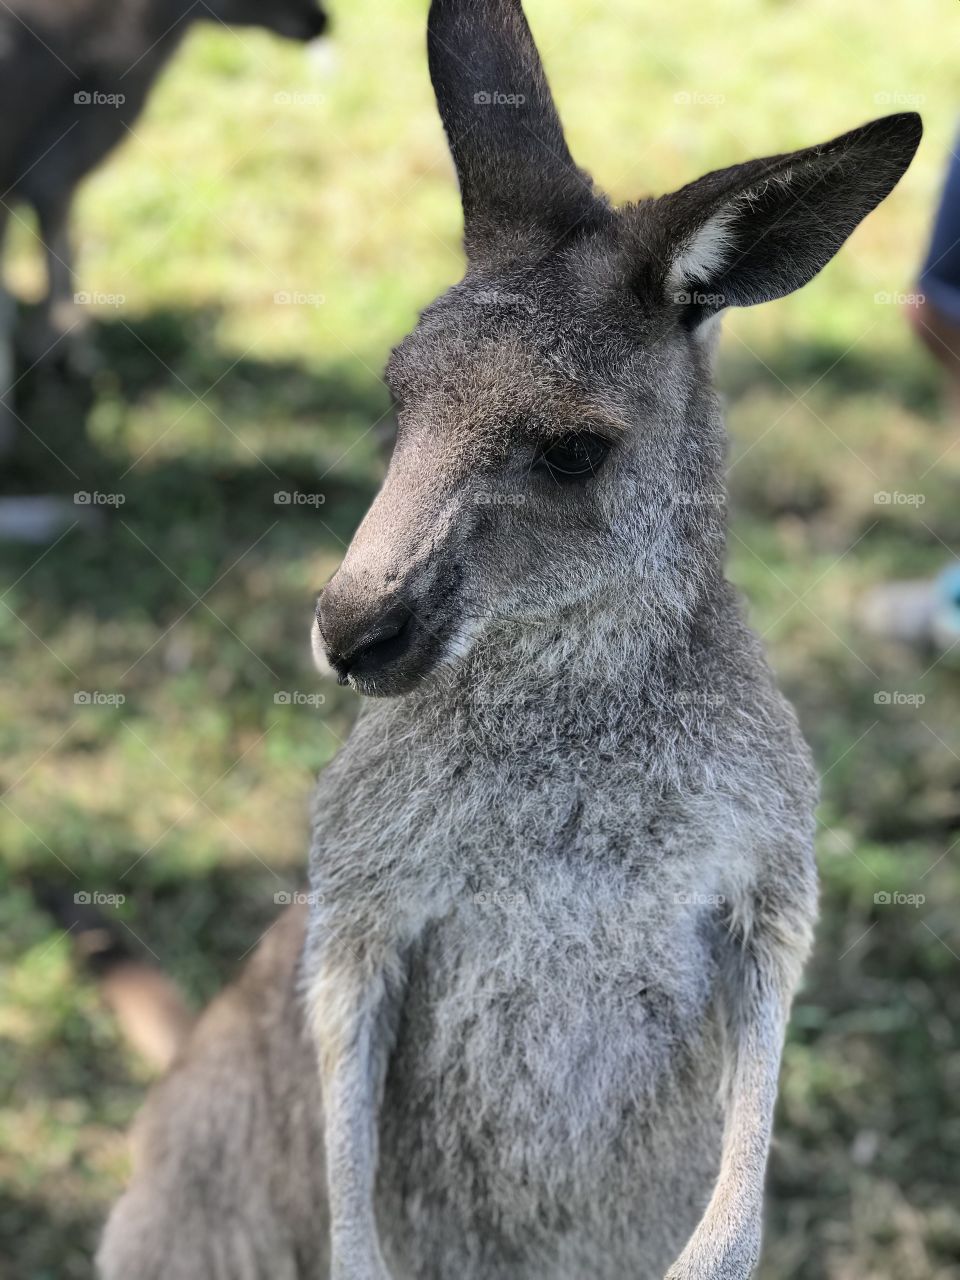 The baby Wallaby of the group was the most curious of all. Naturally skittish yet super soft, this baby was certainly not camera shy today! 